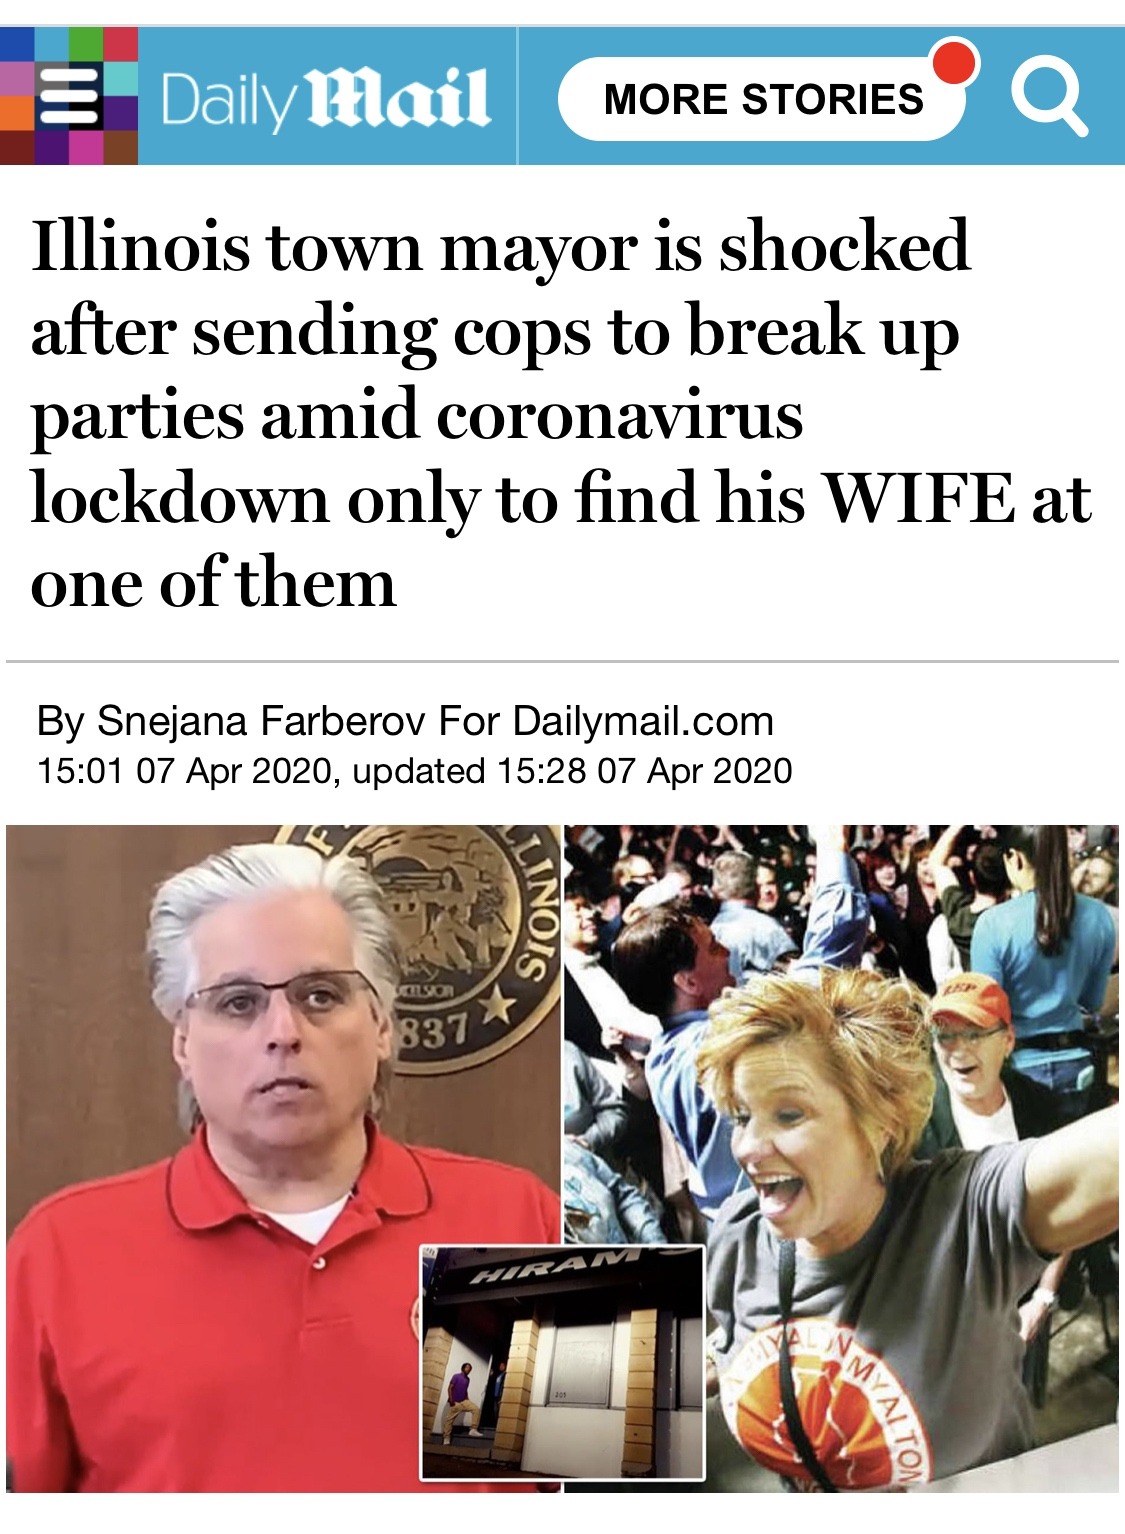 coronavirus lockdown 2020 memes funny - Daily Mail More Stories More Stories Q Illinois town mayor is shocked after sending cops to break up parties amid coronavirus lockdown only to find his Wife at one of them By Snejana Farberov For Dailymail.com , upd